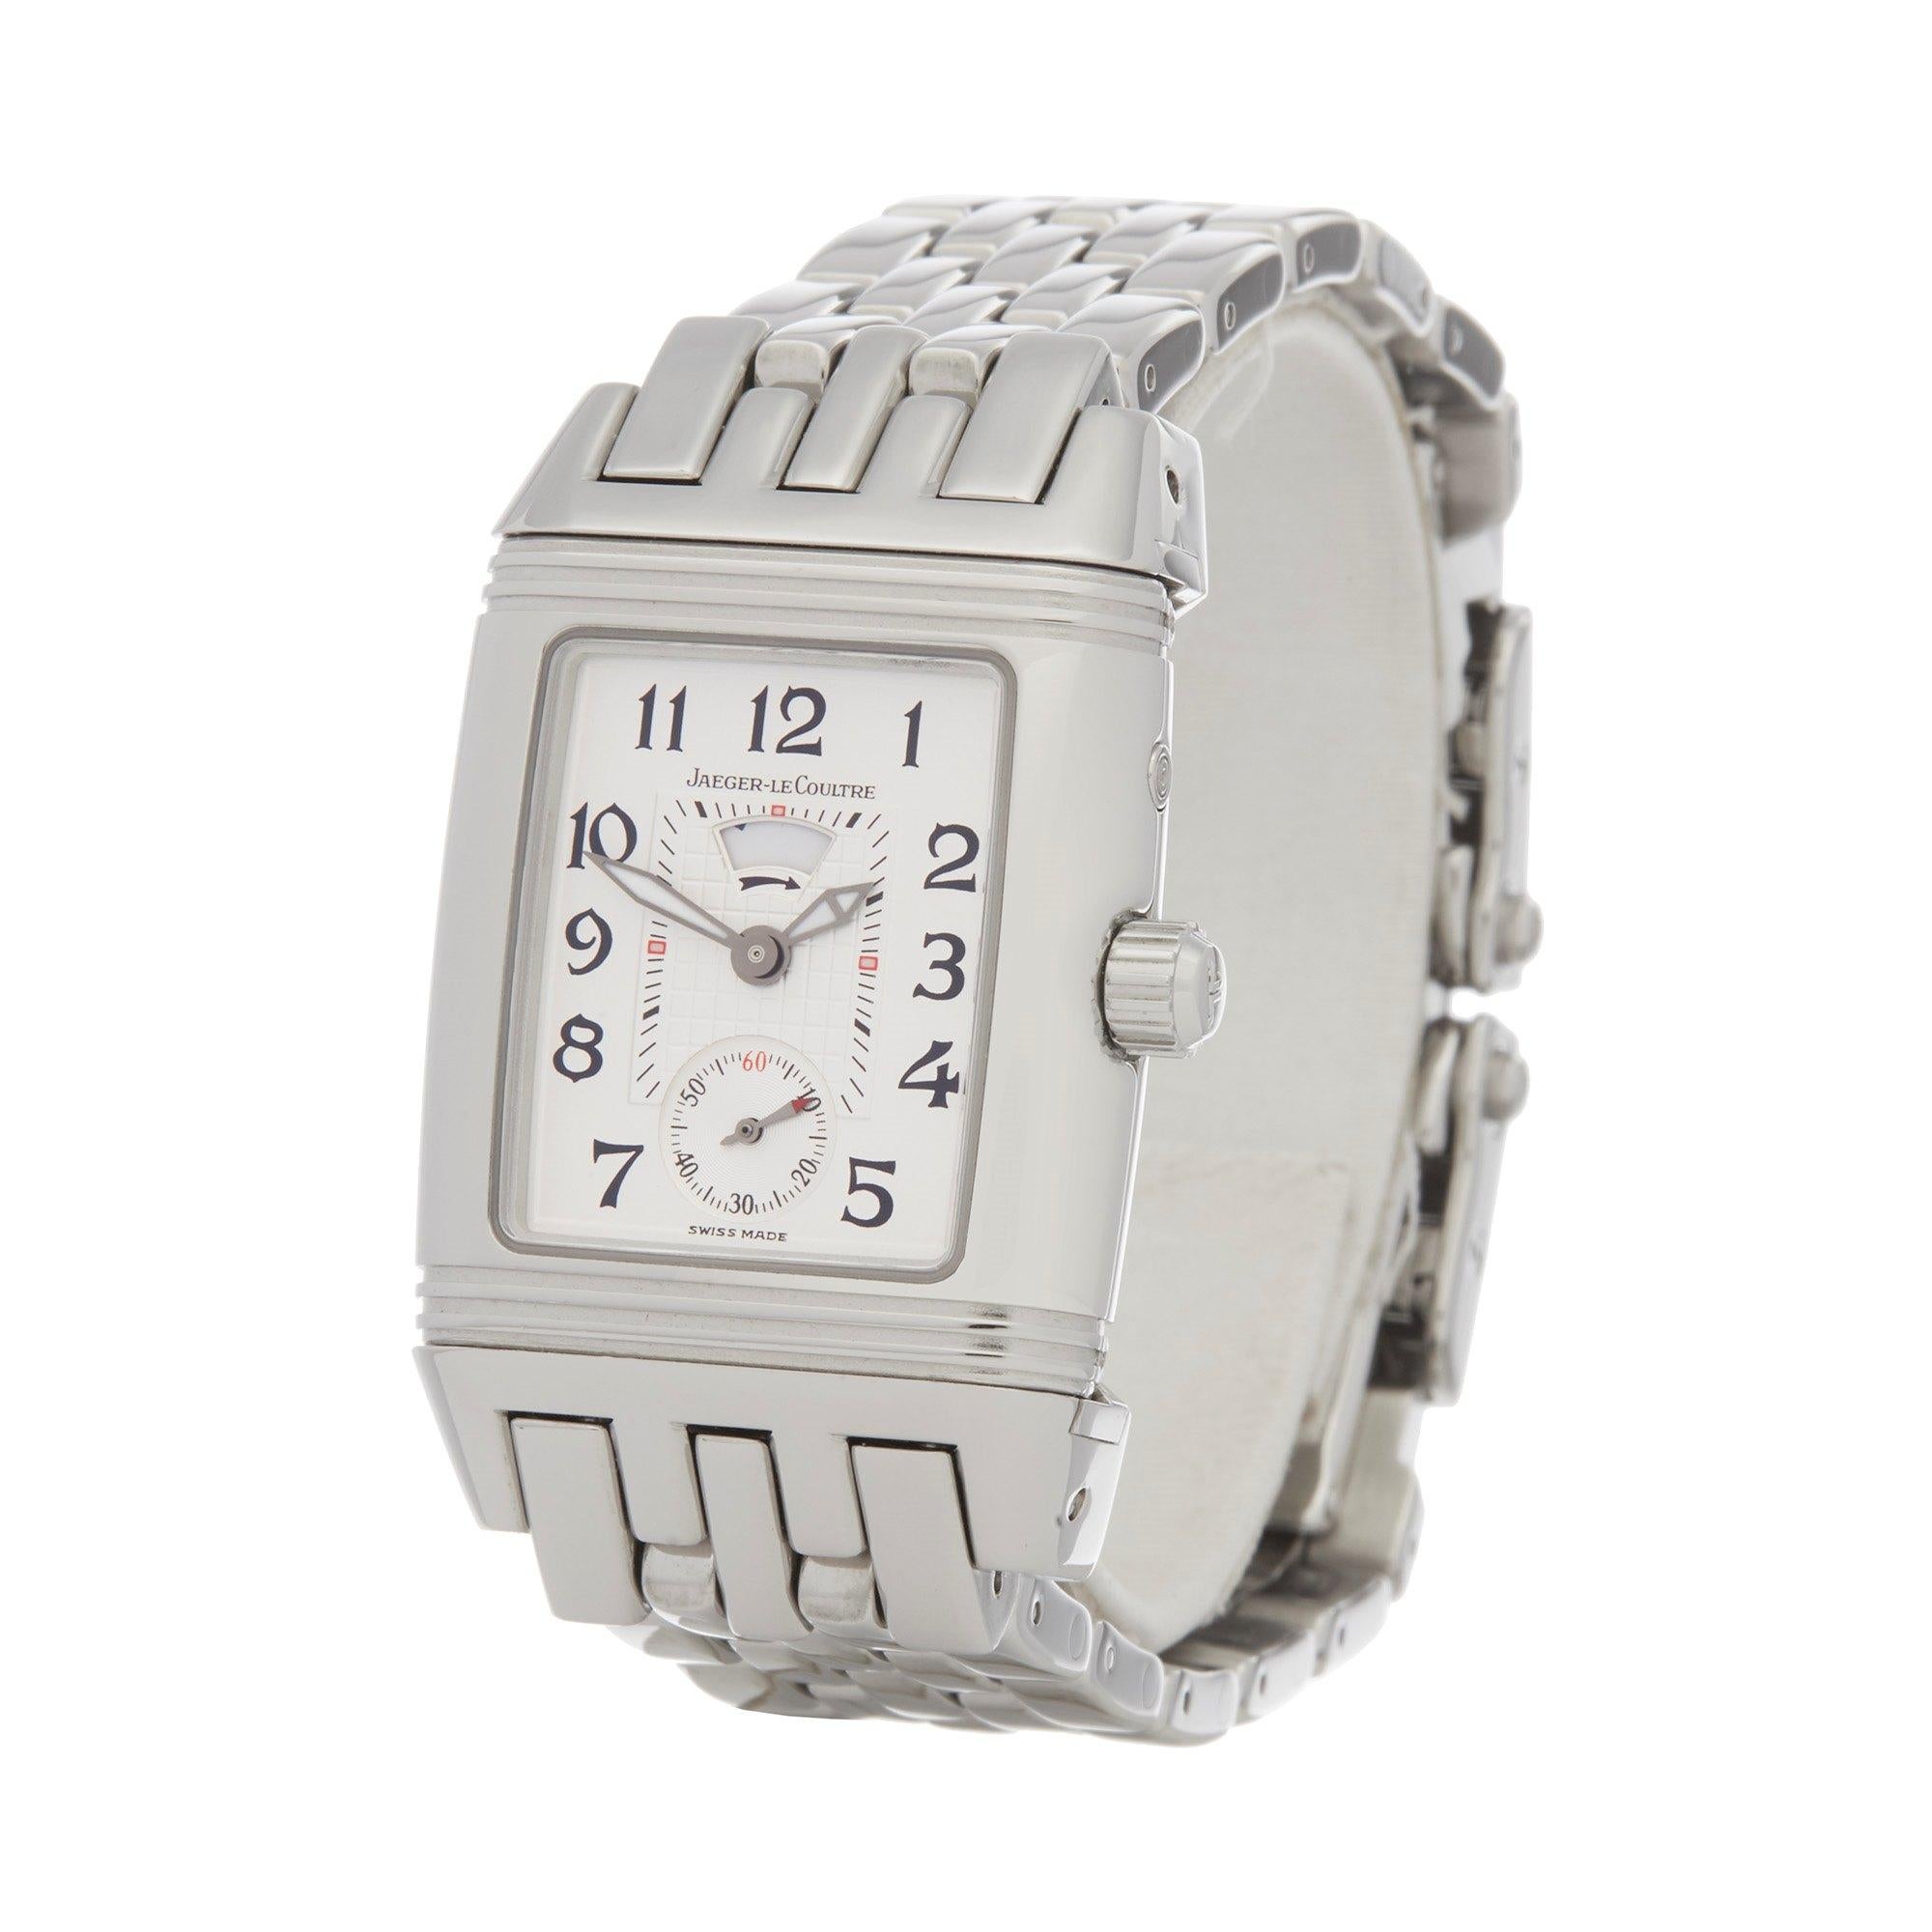 Xupes Reference: COM2320
Manufacturer: Jaeger-LeCoultre
Model: Reverso
Model Variant: 
Model Number: 296.8.74
Age: 2003
Gender: Ladies
Complete With: Jaeger- LeCoultre Box, Manuals, Guarantee, Original Purchase Receipt,  Service Pouch ,Service